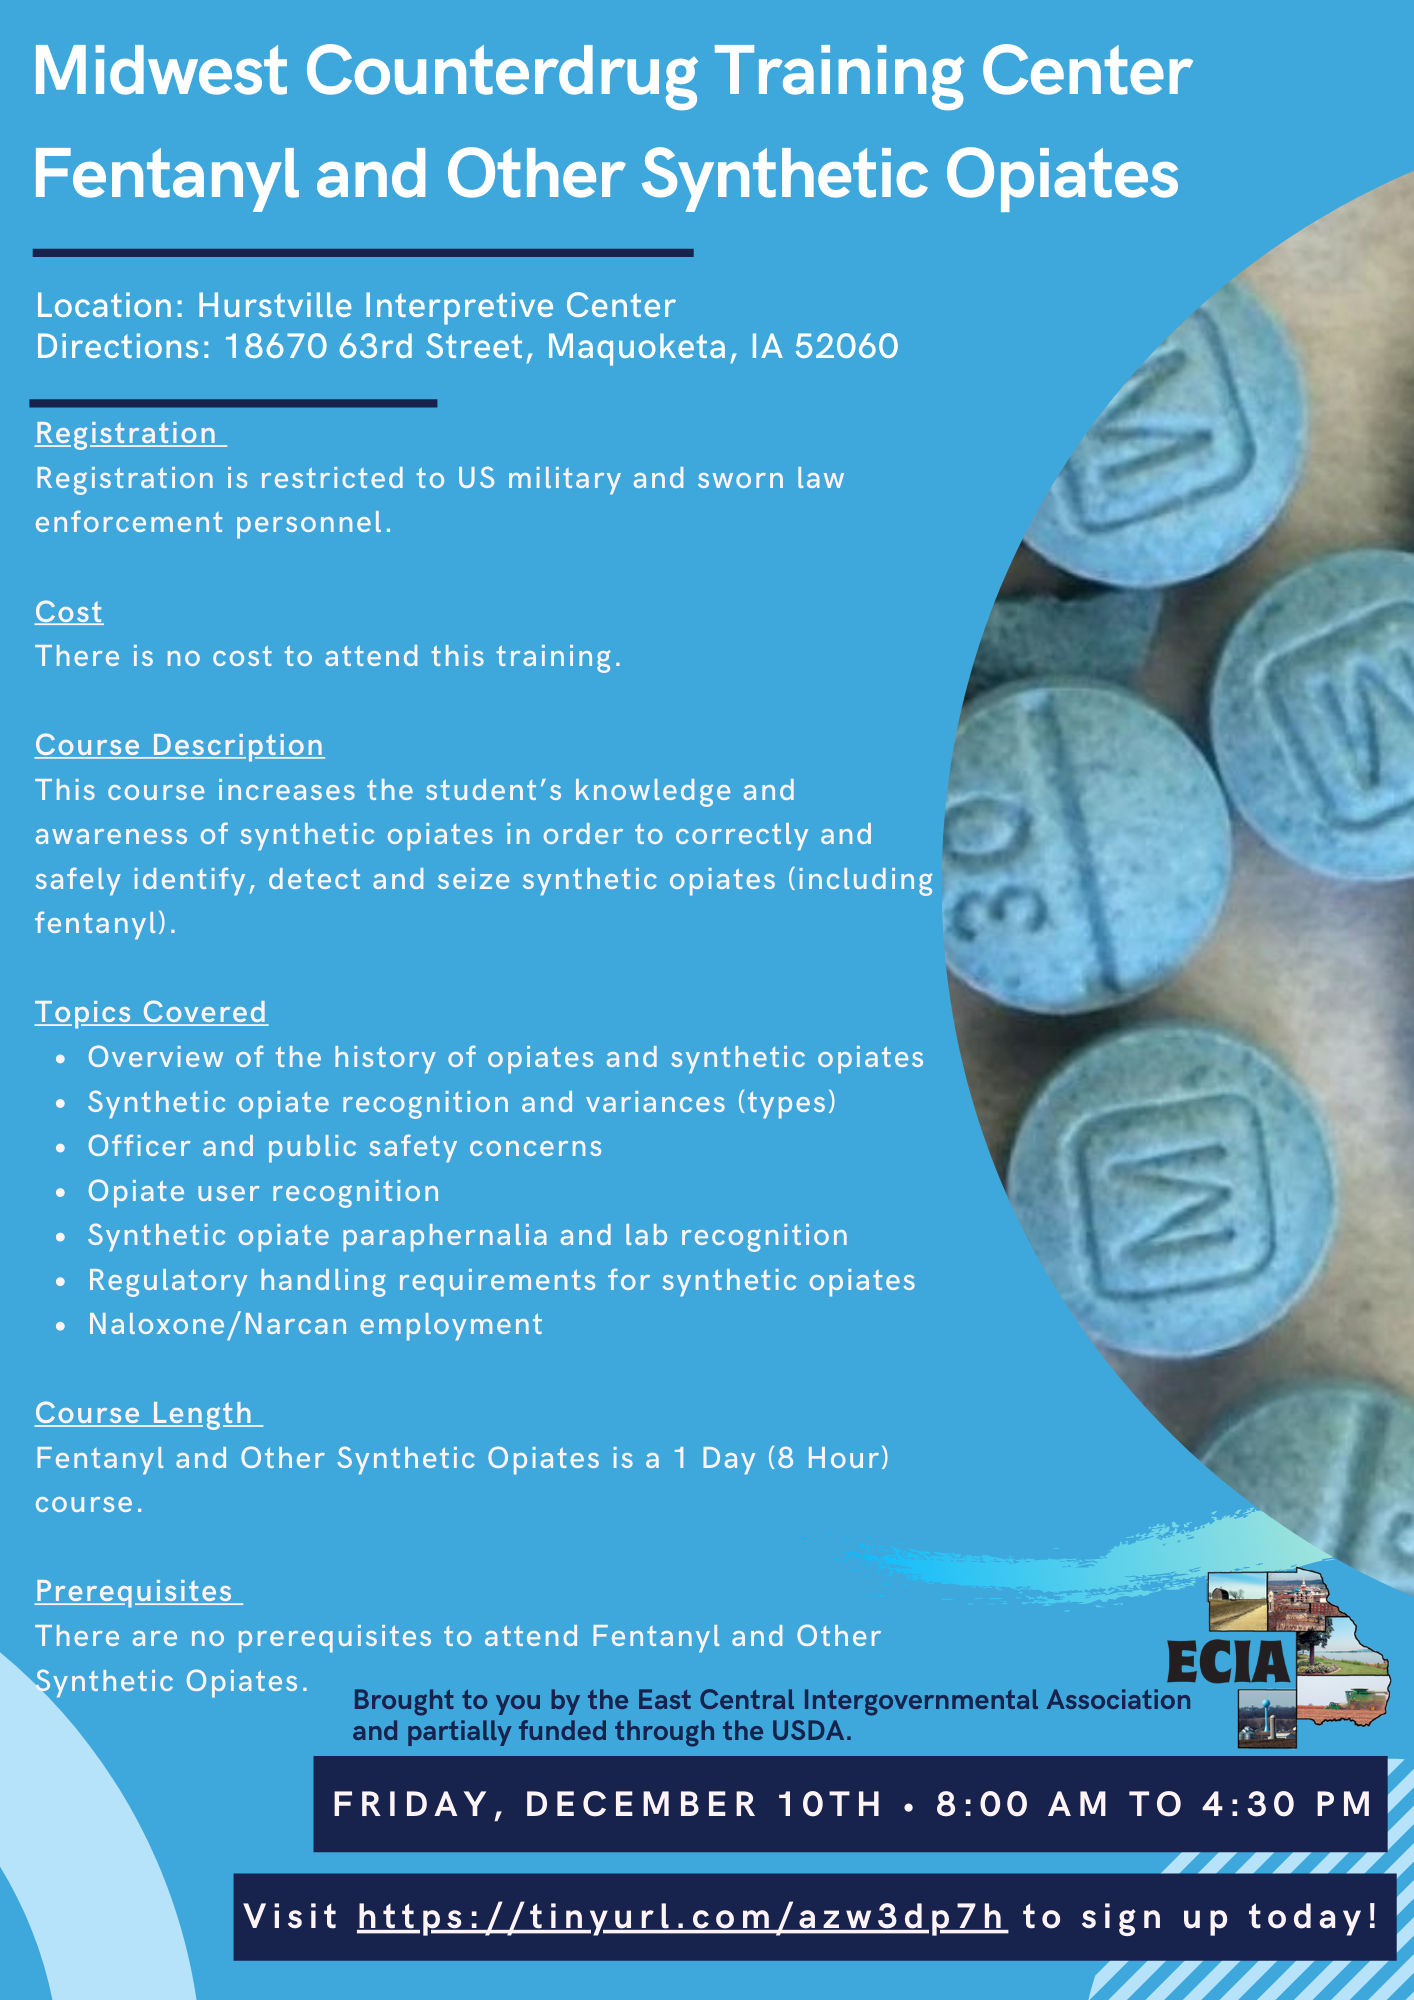 Fentanyl and Other Synthetic Opiates Training 12-10-21